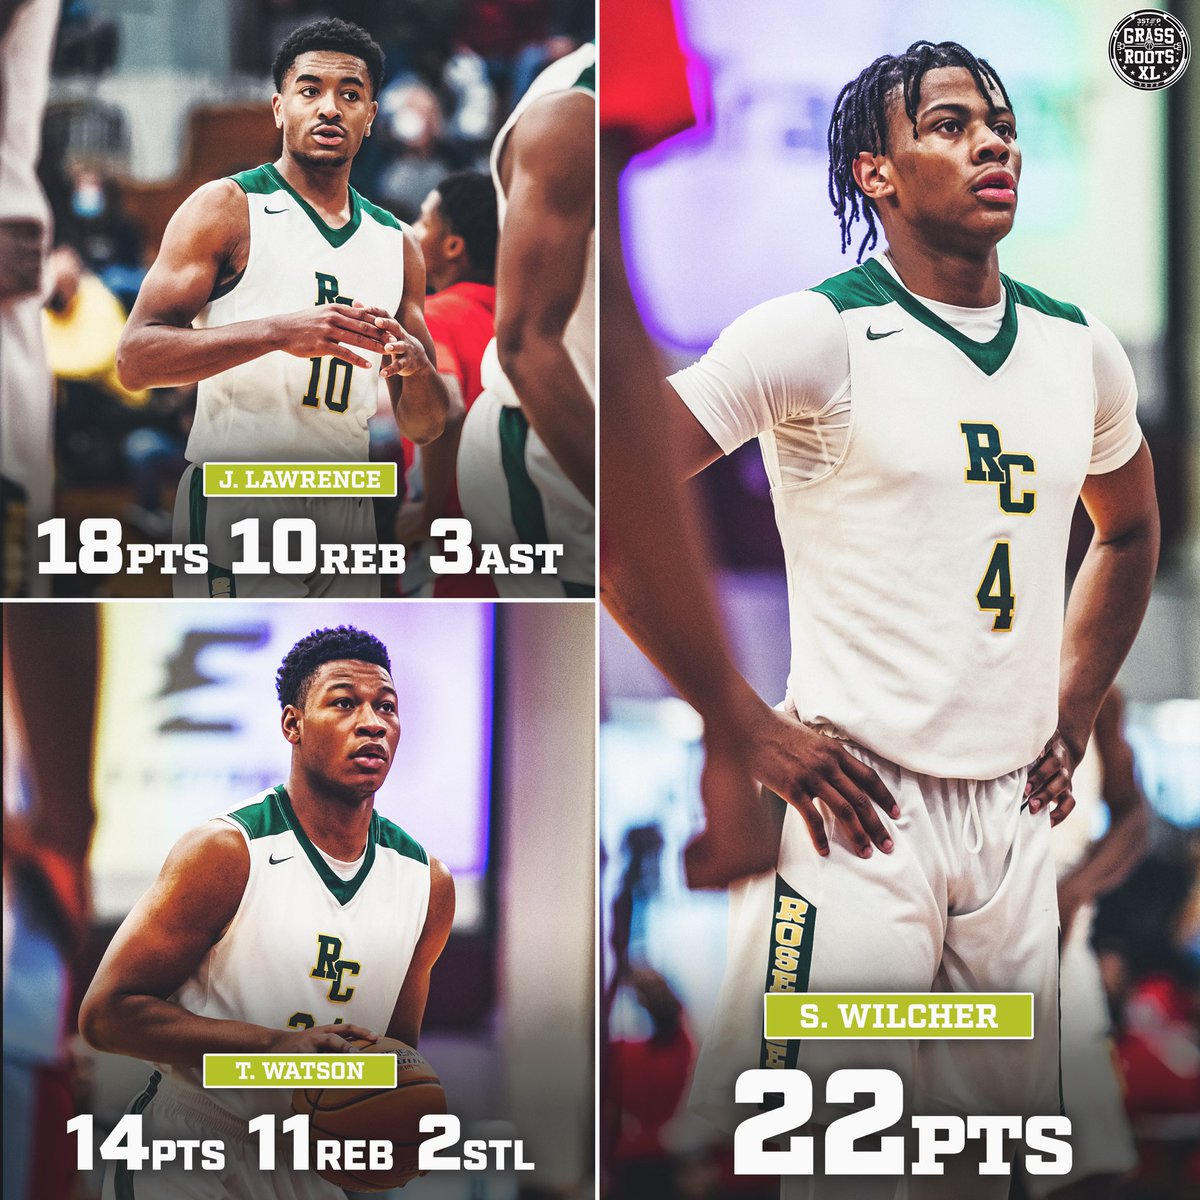 Roselle Catholic (@rc_basketball) defeats Bergen Catholic in a 76-64 victory 💨 Simeon Wilcher (@SimeonWilcher) led all scorers for RC with 22 points 🔥 Jamarques Lawrence (@JLawrence10_) & Tarik Watson (@tarikwatson1) recorded double-doubles in the win 😤 (📸: @dfritzphotos)